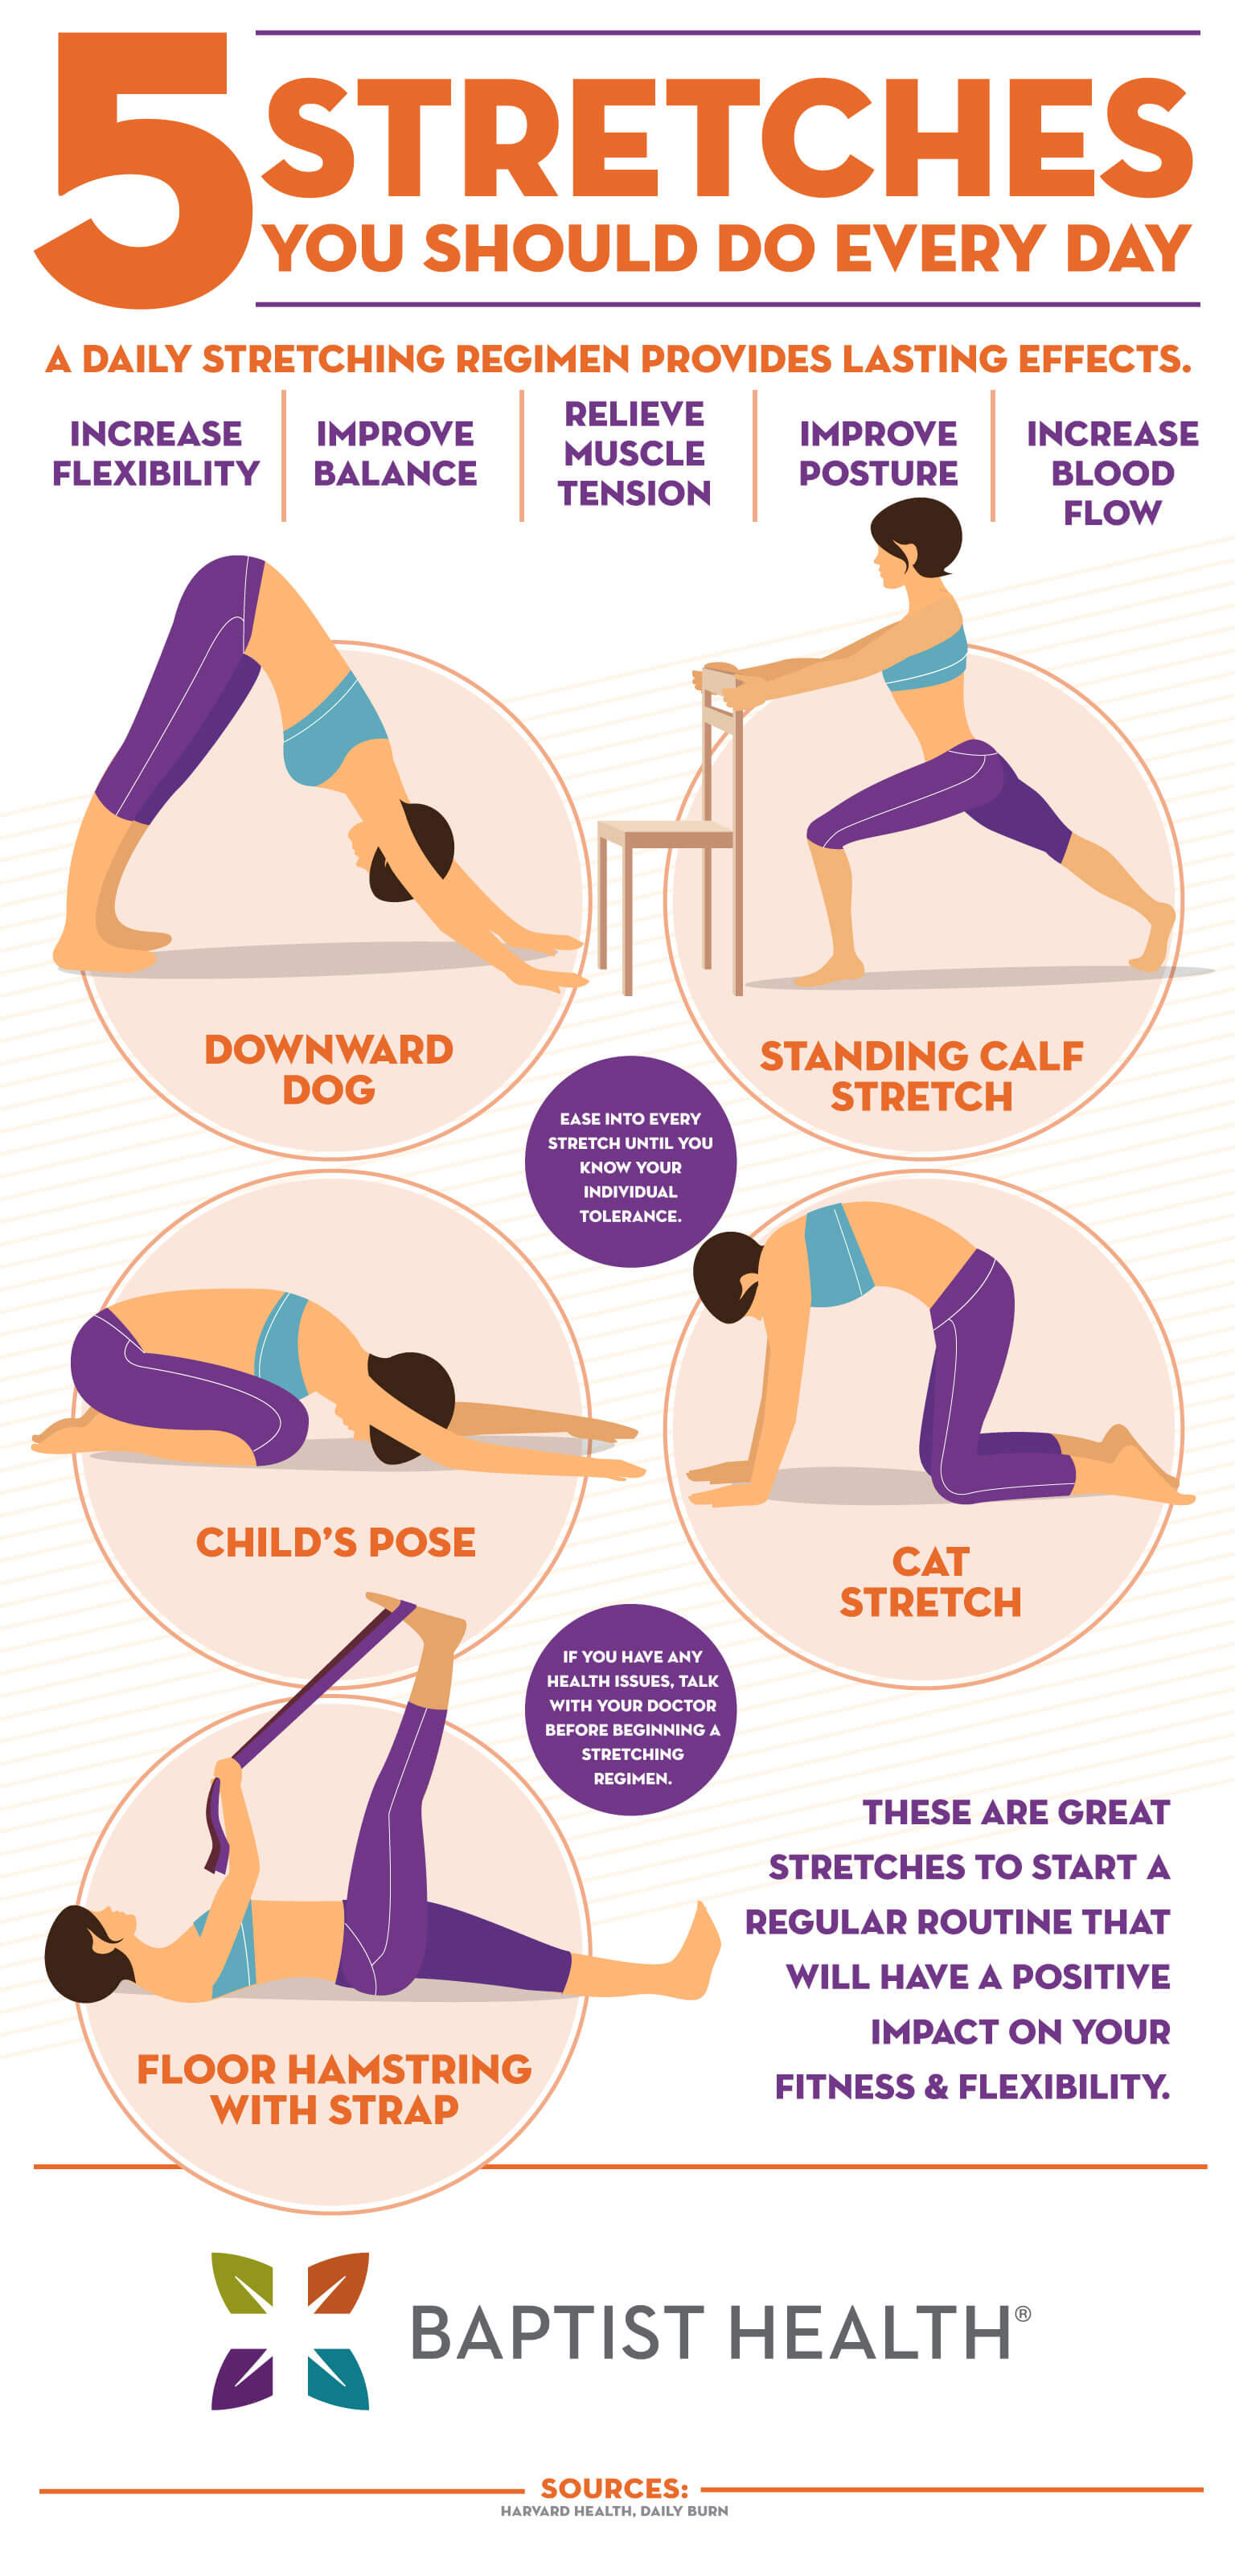 6 Gentle Yoga Exercises to Promote Better Hearing [Infographic]